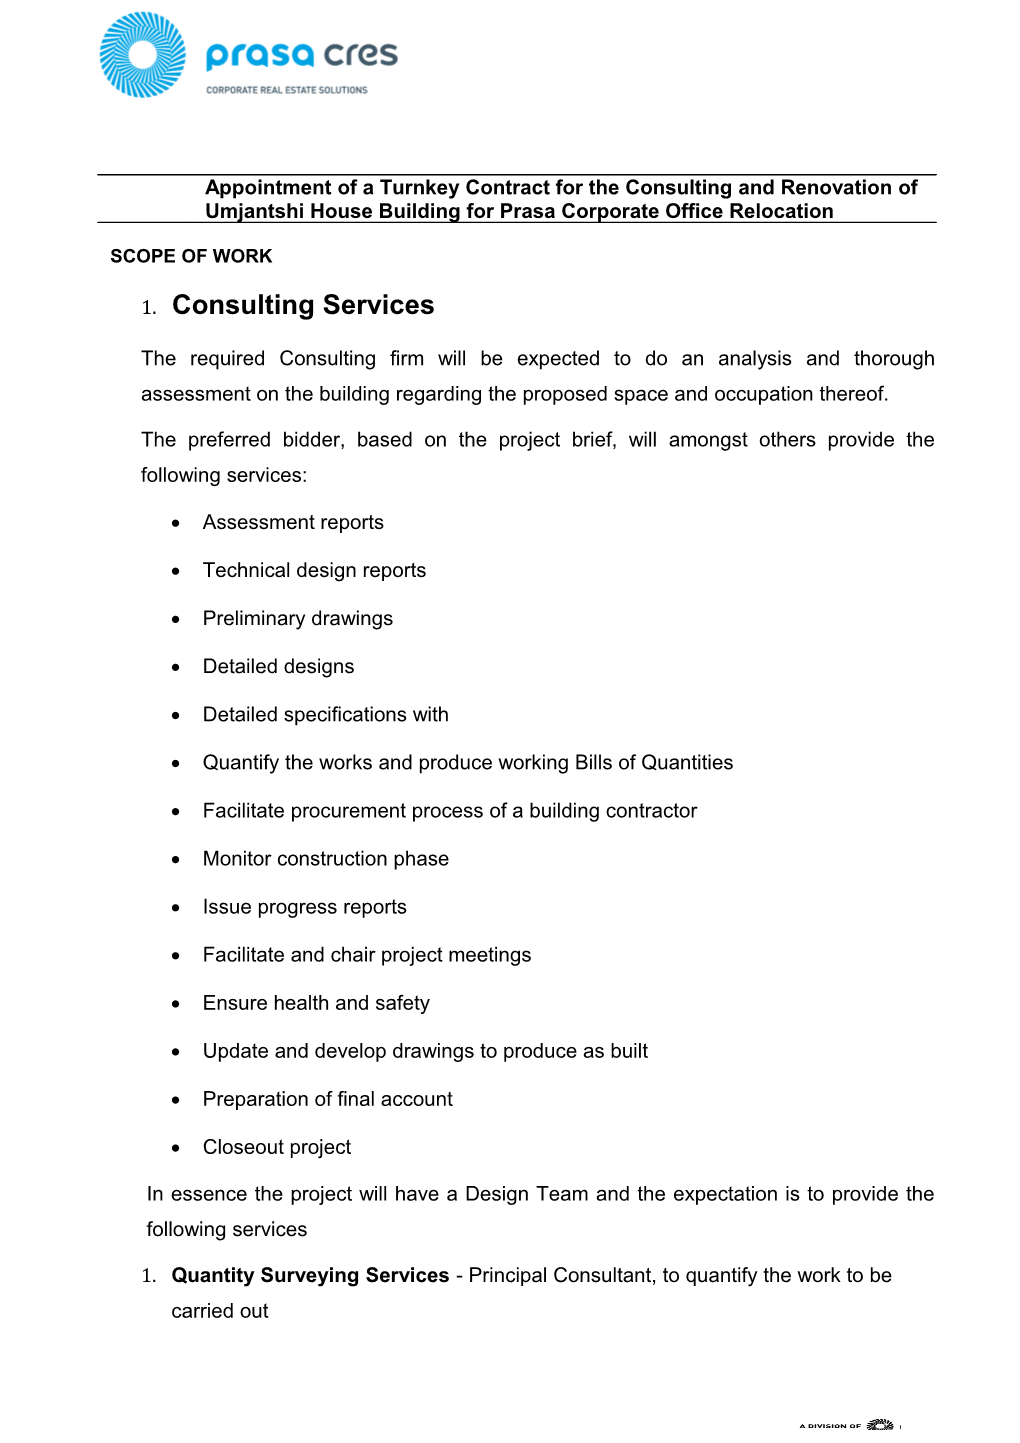 1. Consulting Services